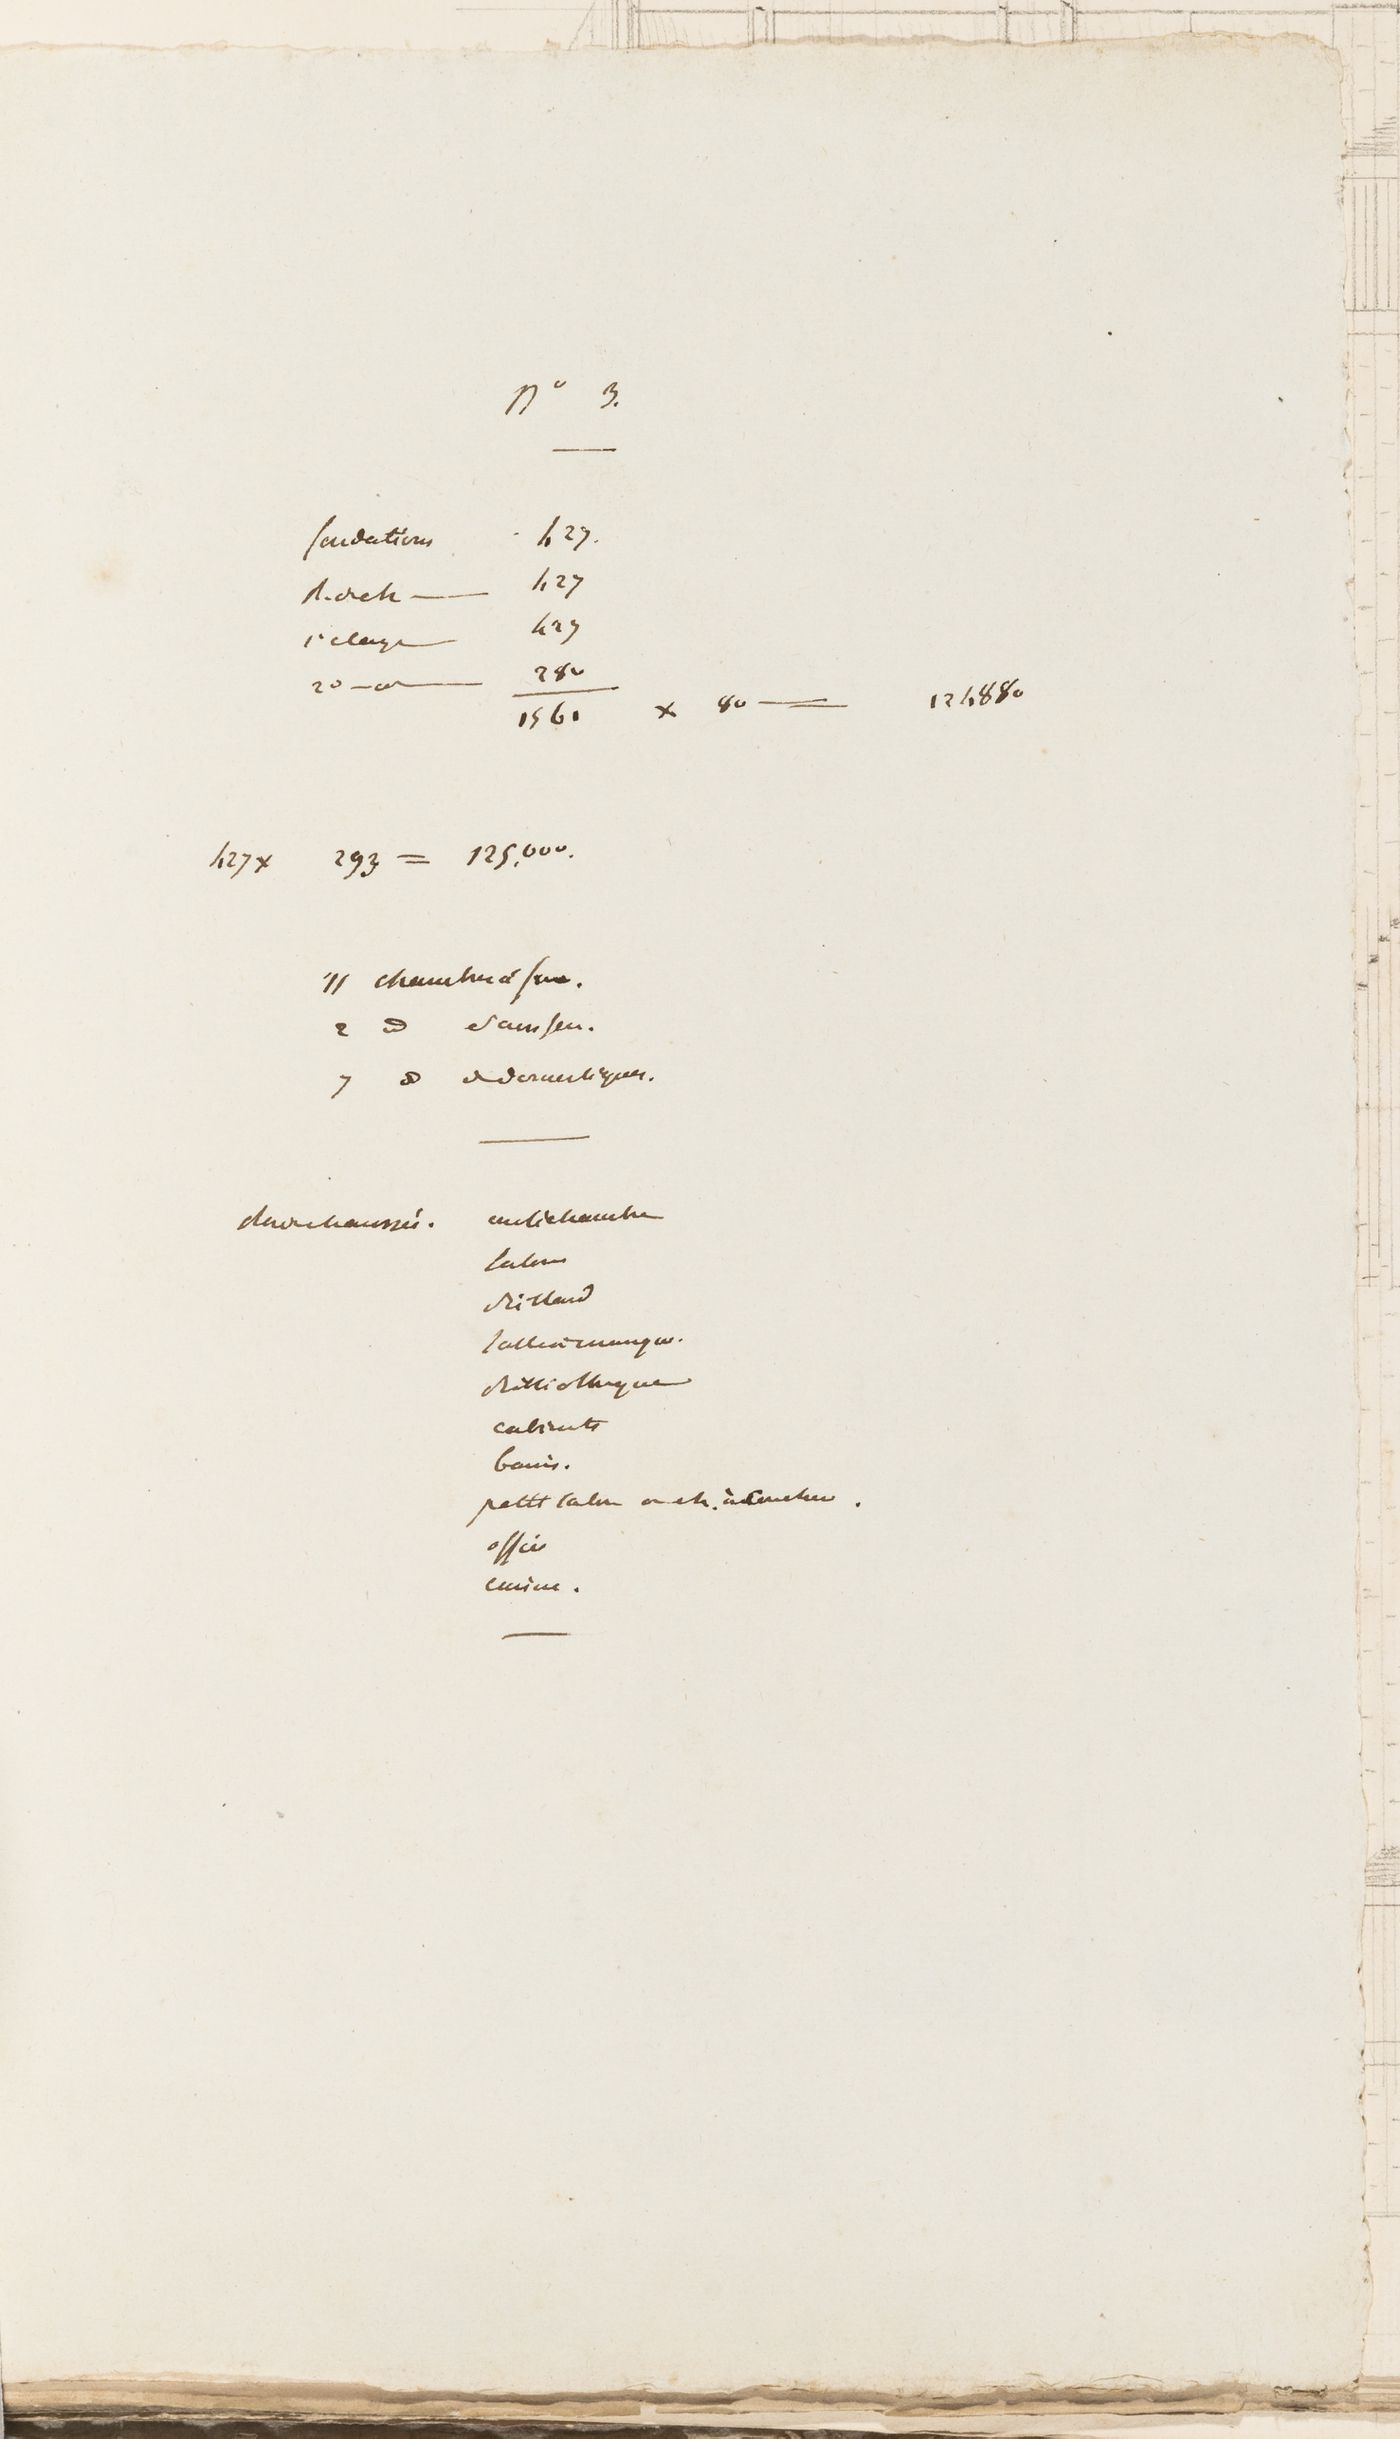 Project no. 3 for a country house for comte Treilhard: Notes and calculations